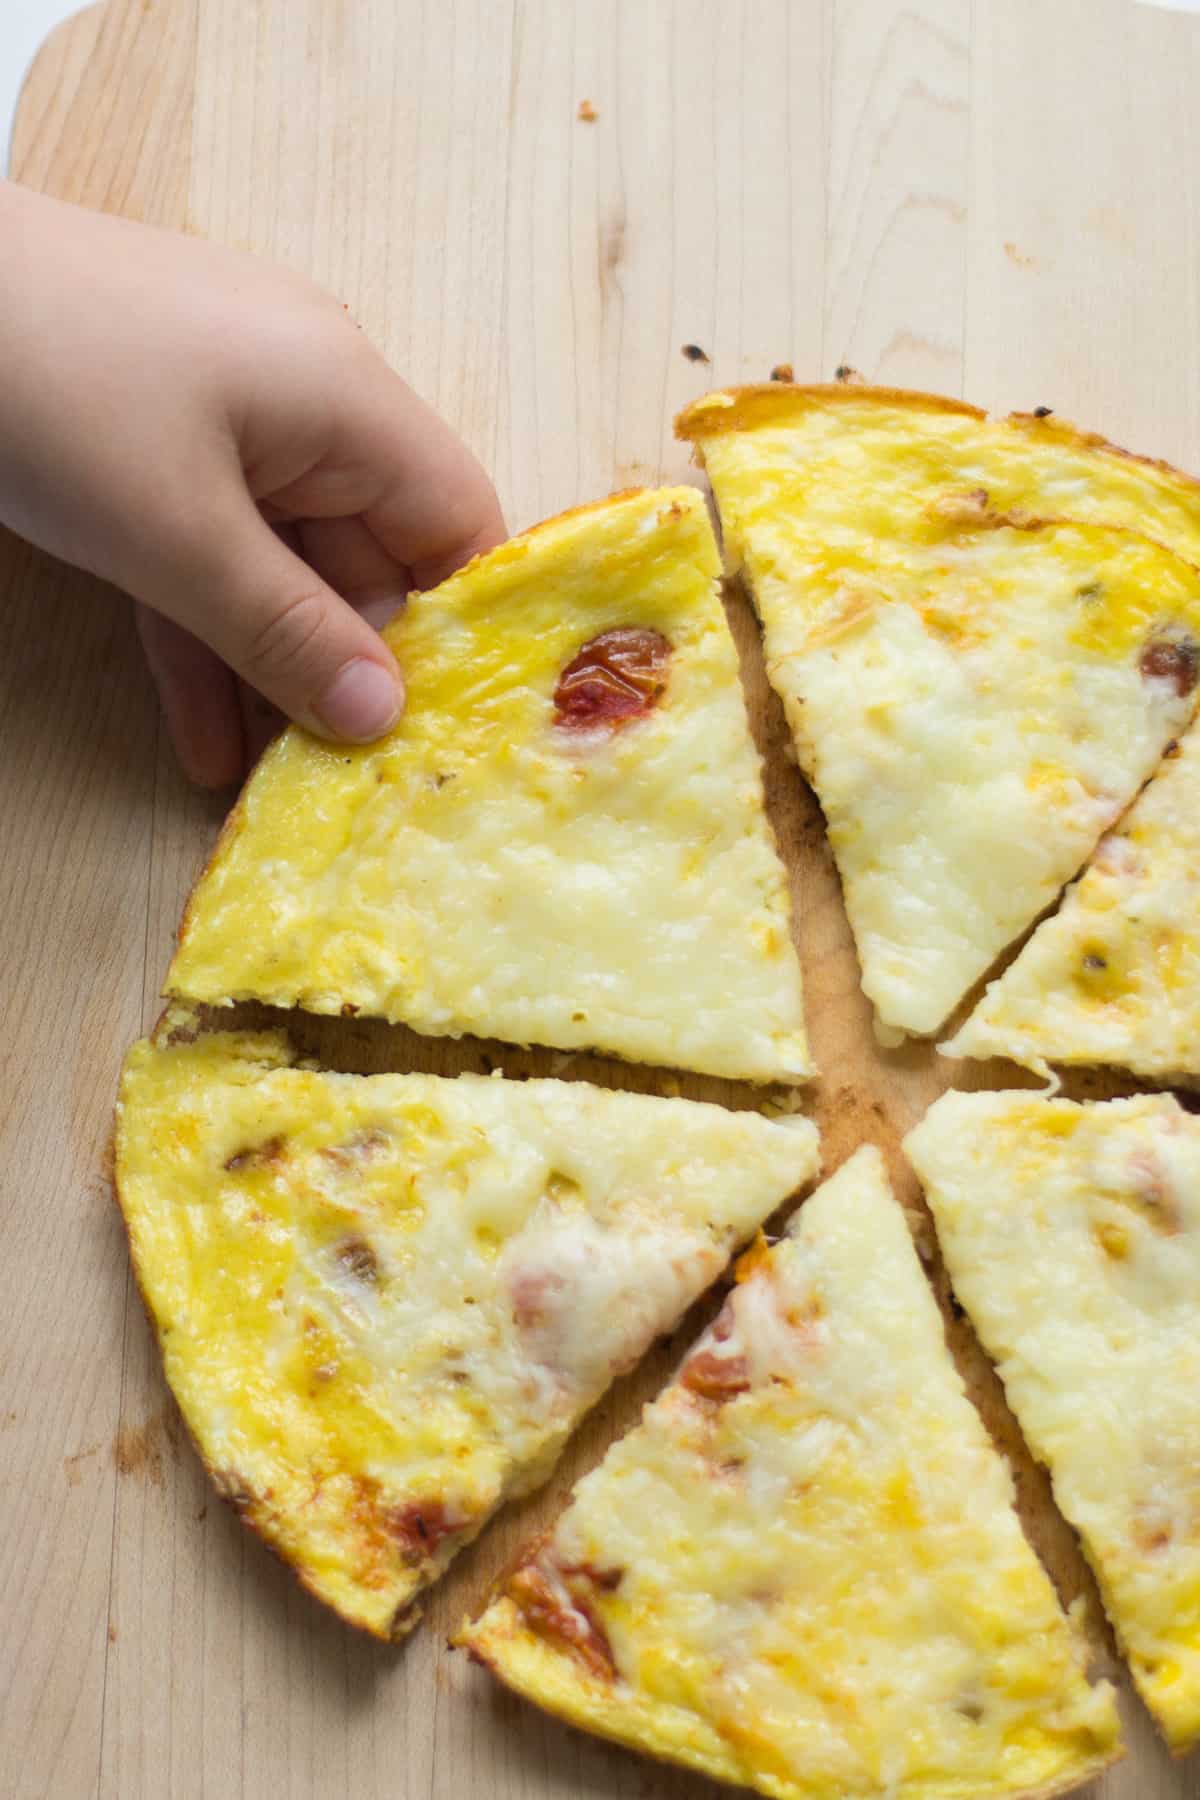 Toddler's hand grabbing a slice of pizza eggs.